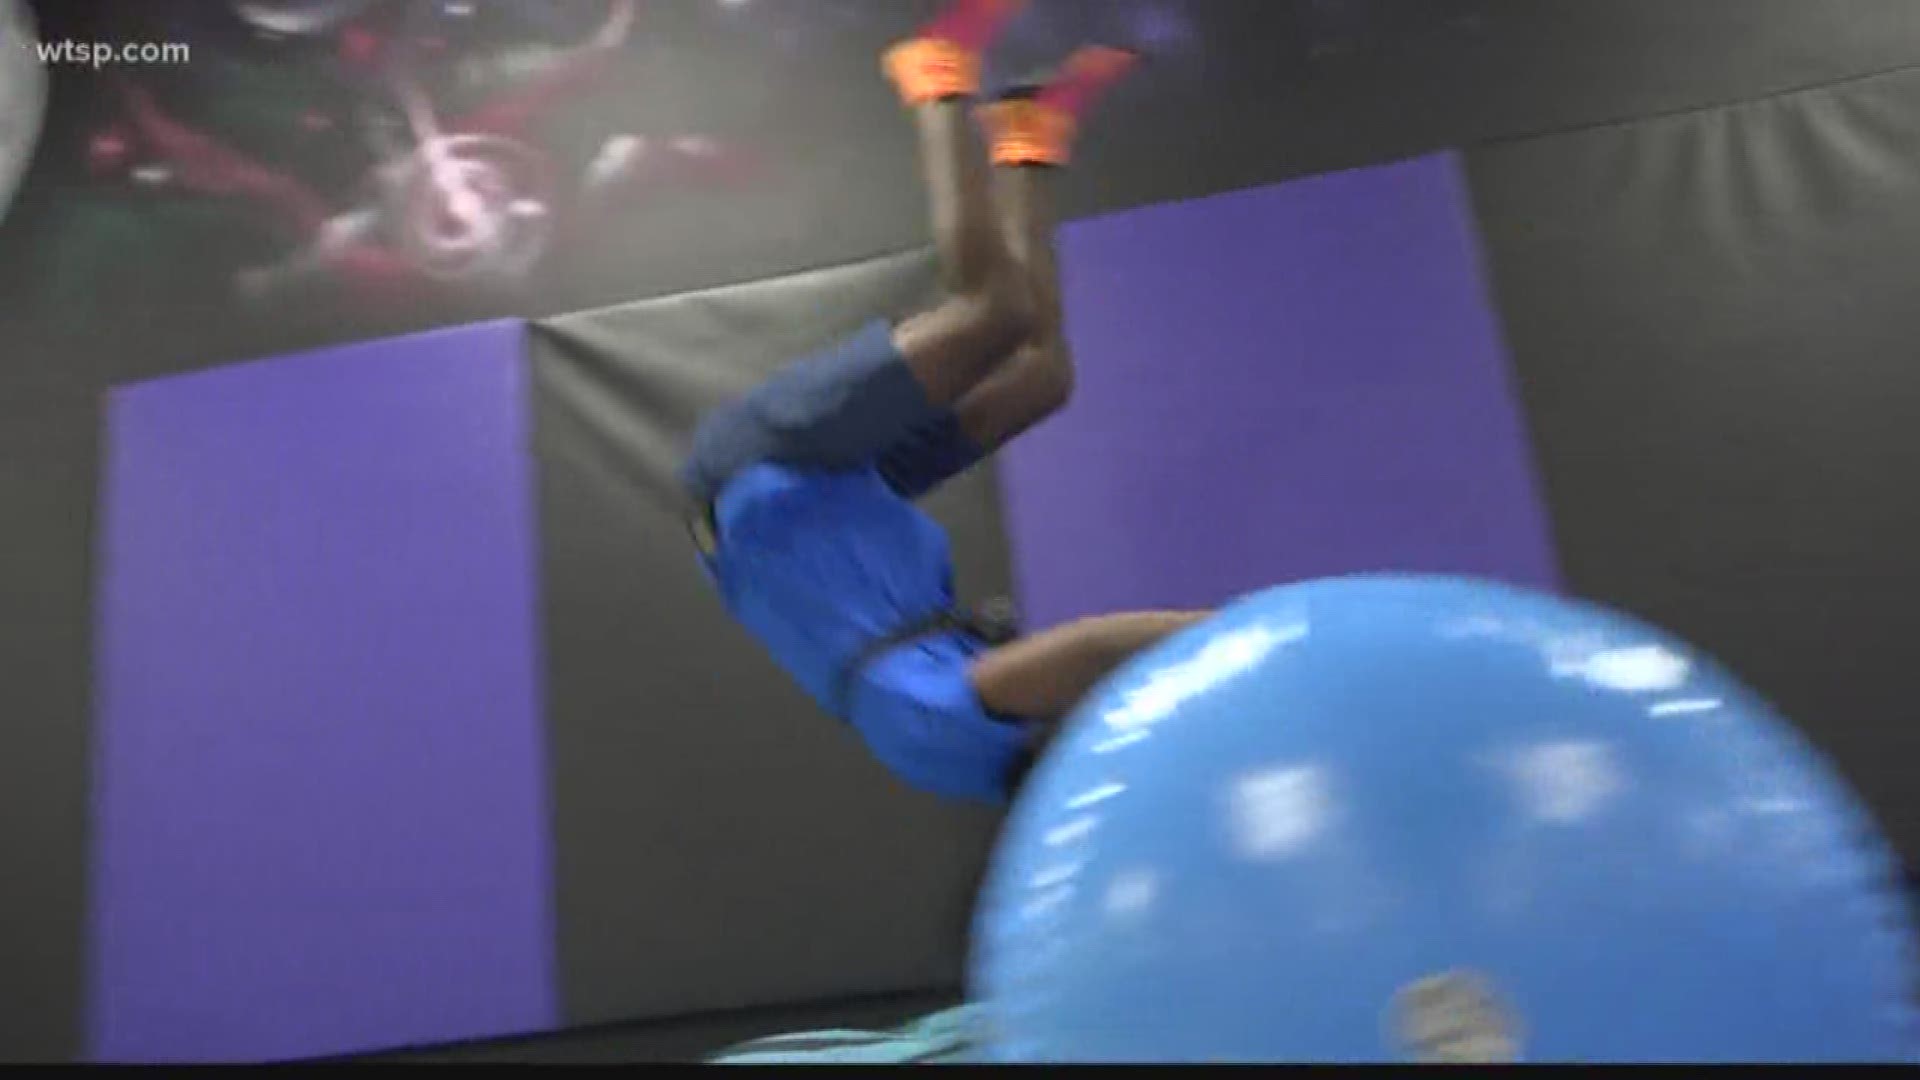 A new trampoline park opens in Bradenton that has a collection of ultimate extreme air sports. Brightside was there to check out what it has to offer.